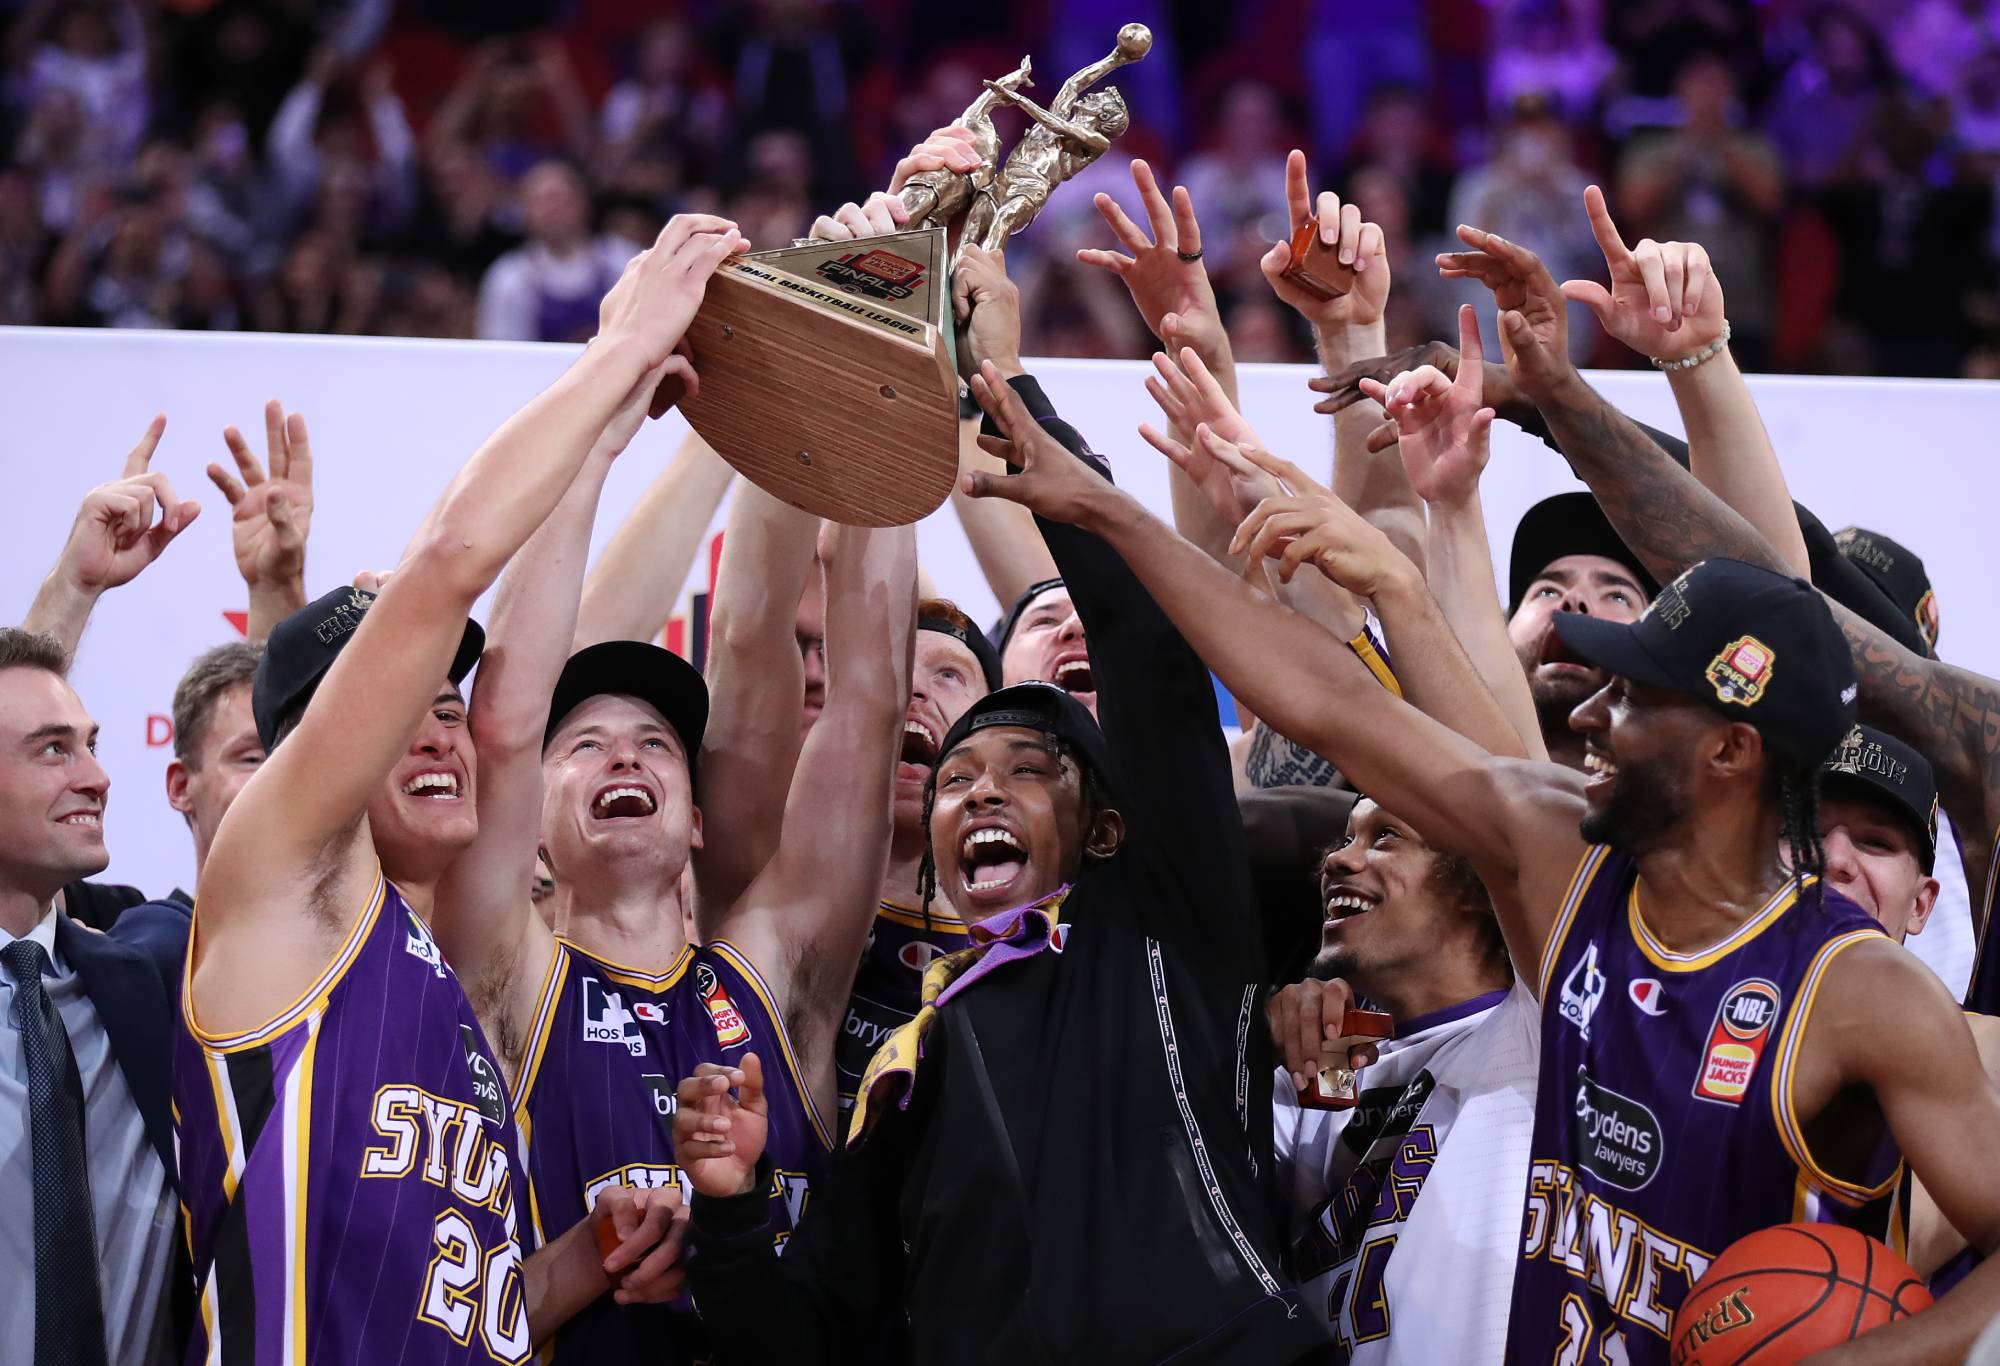 SYDNEY, AUSTRALIA - MAY 11: The Sydney Kings celebrate victory in game three of the NBL Grand Final series between Sydney Kings and Tasmania JackJumpers at Qudos Bank Arena on May 11, 2022 in Sydney, Australia. (Photo by Matt King/Getty Images)